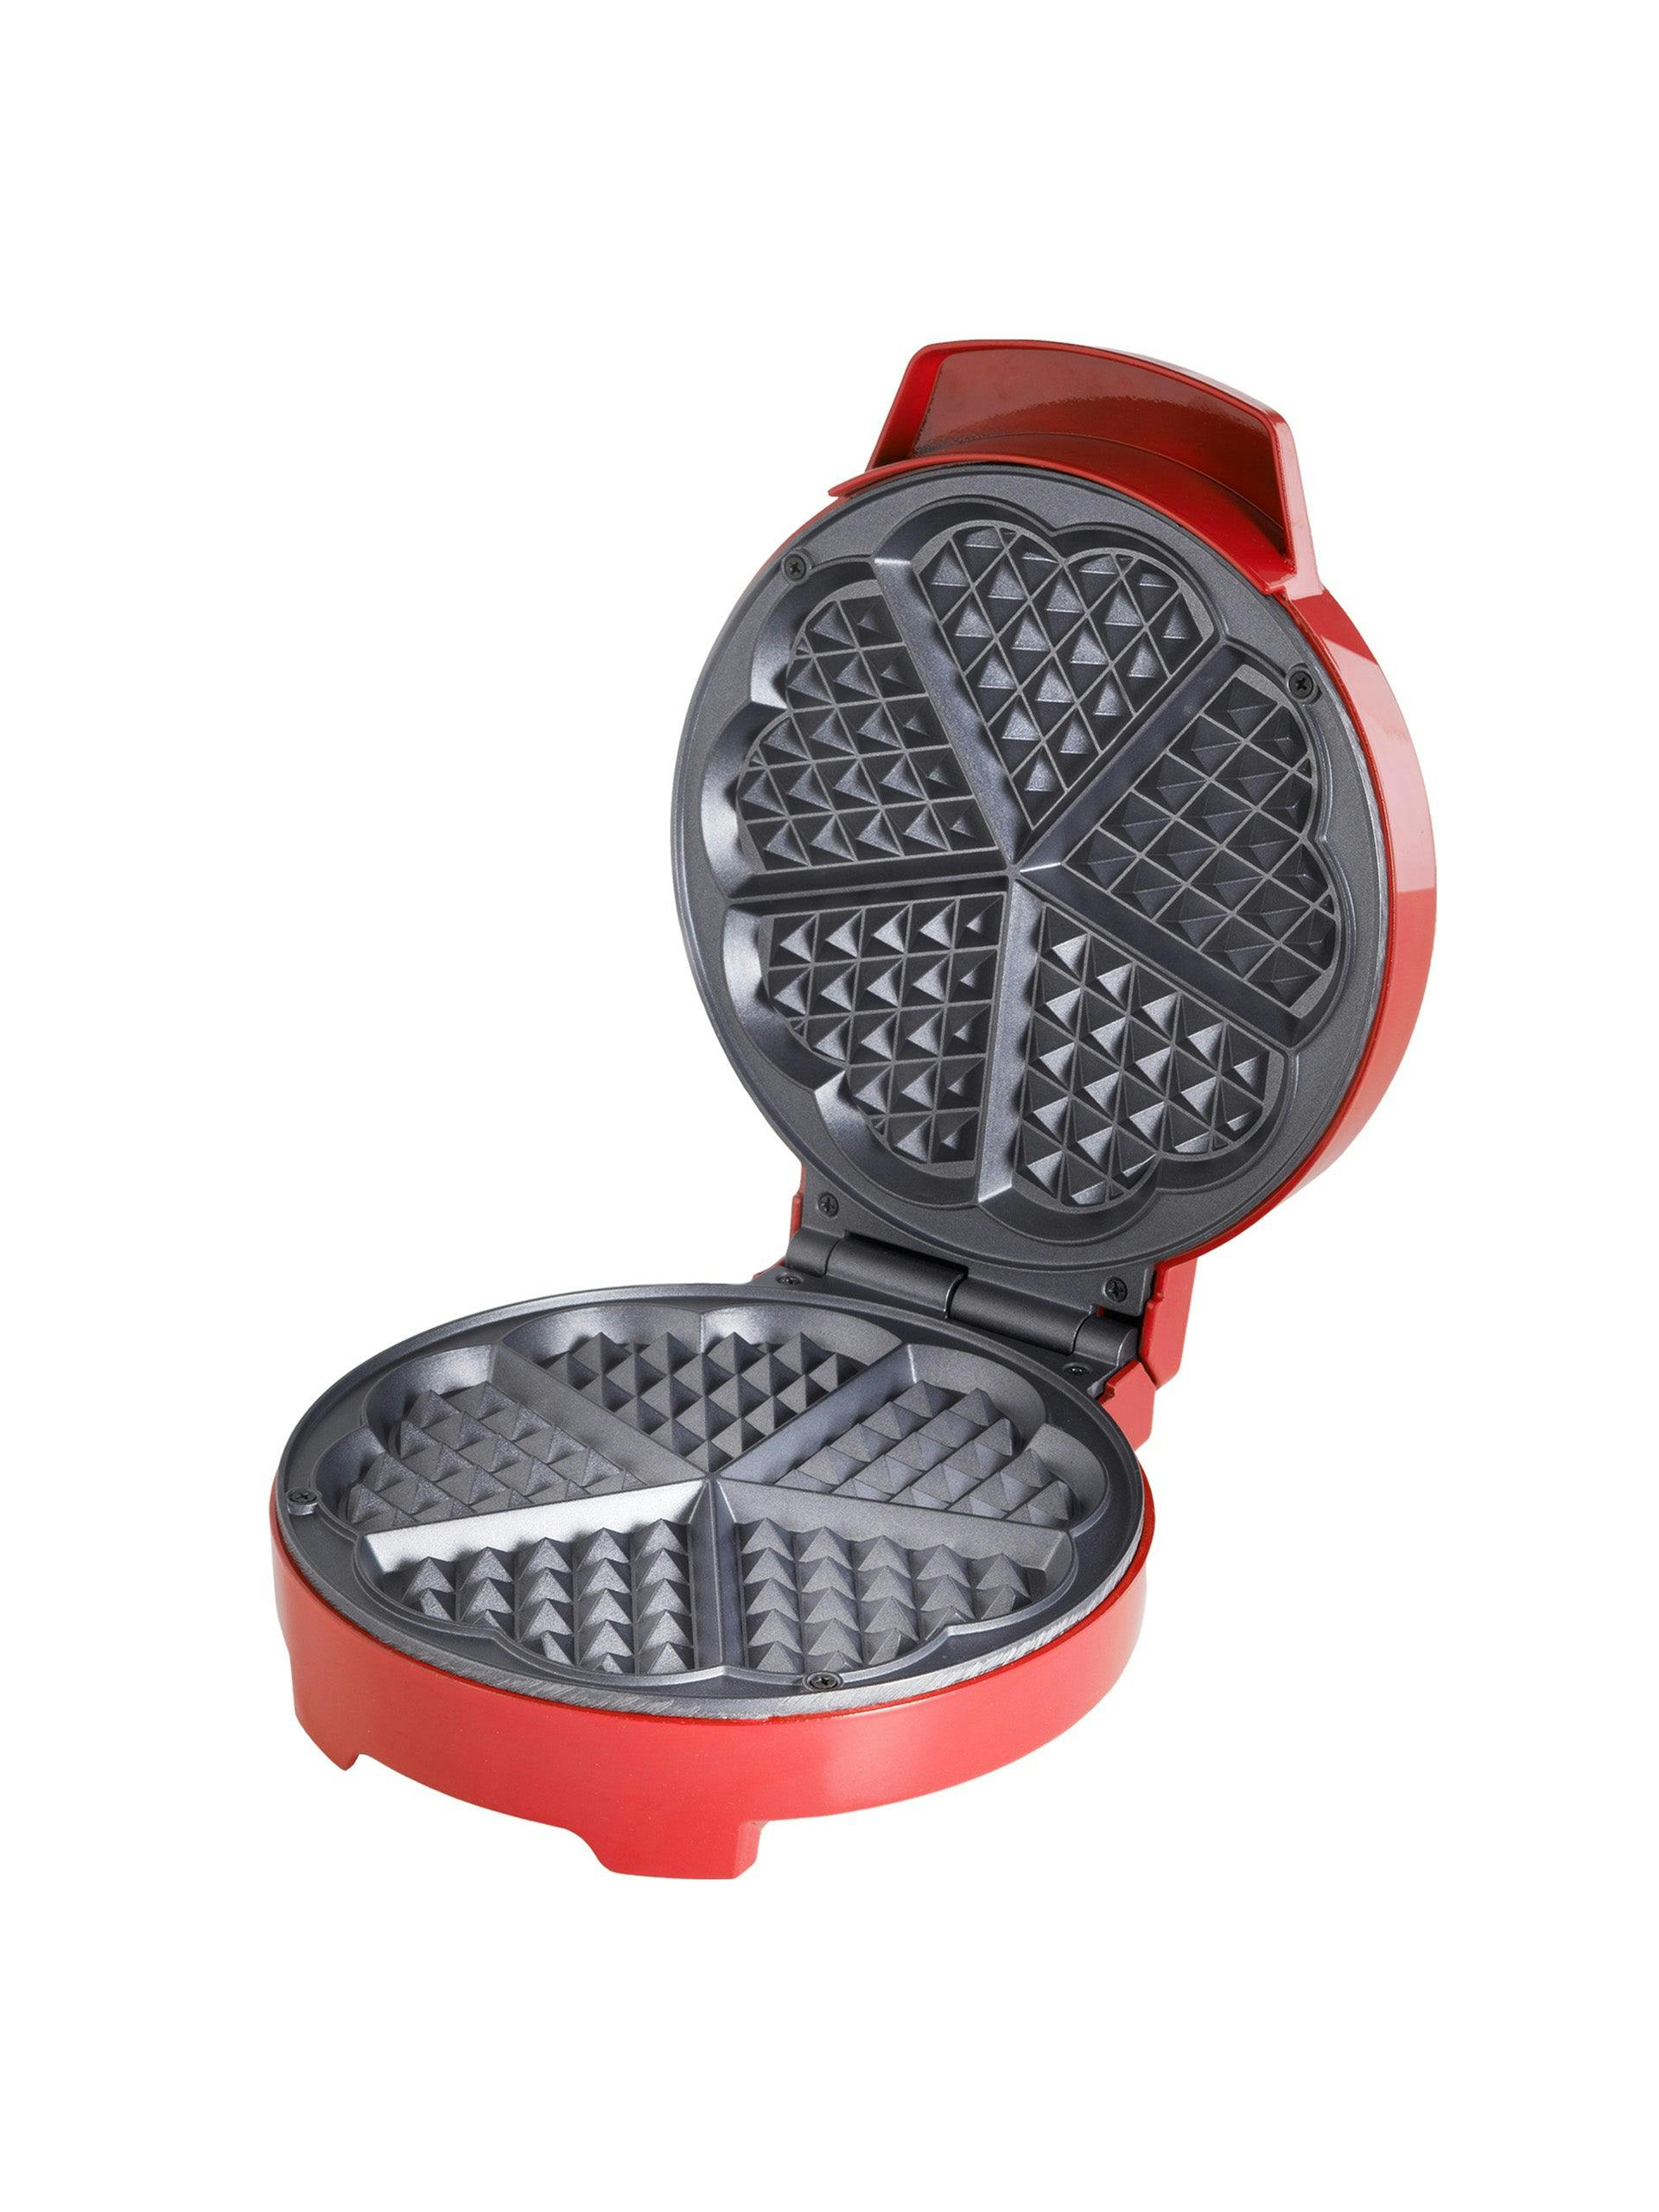 Red heart waffle maker